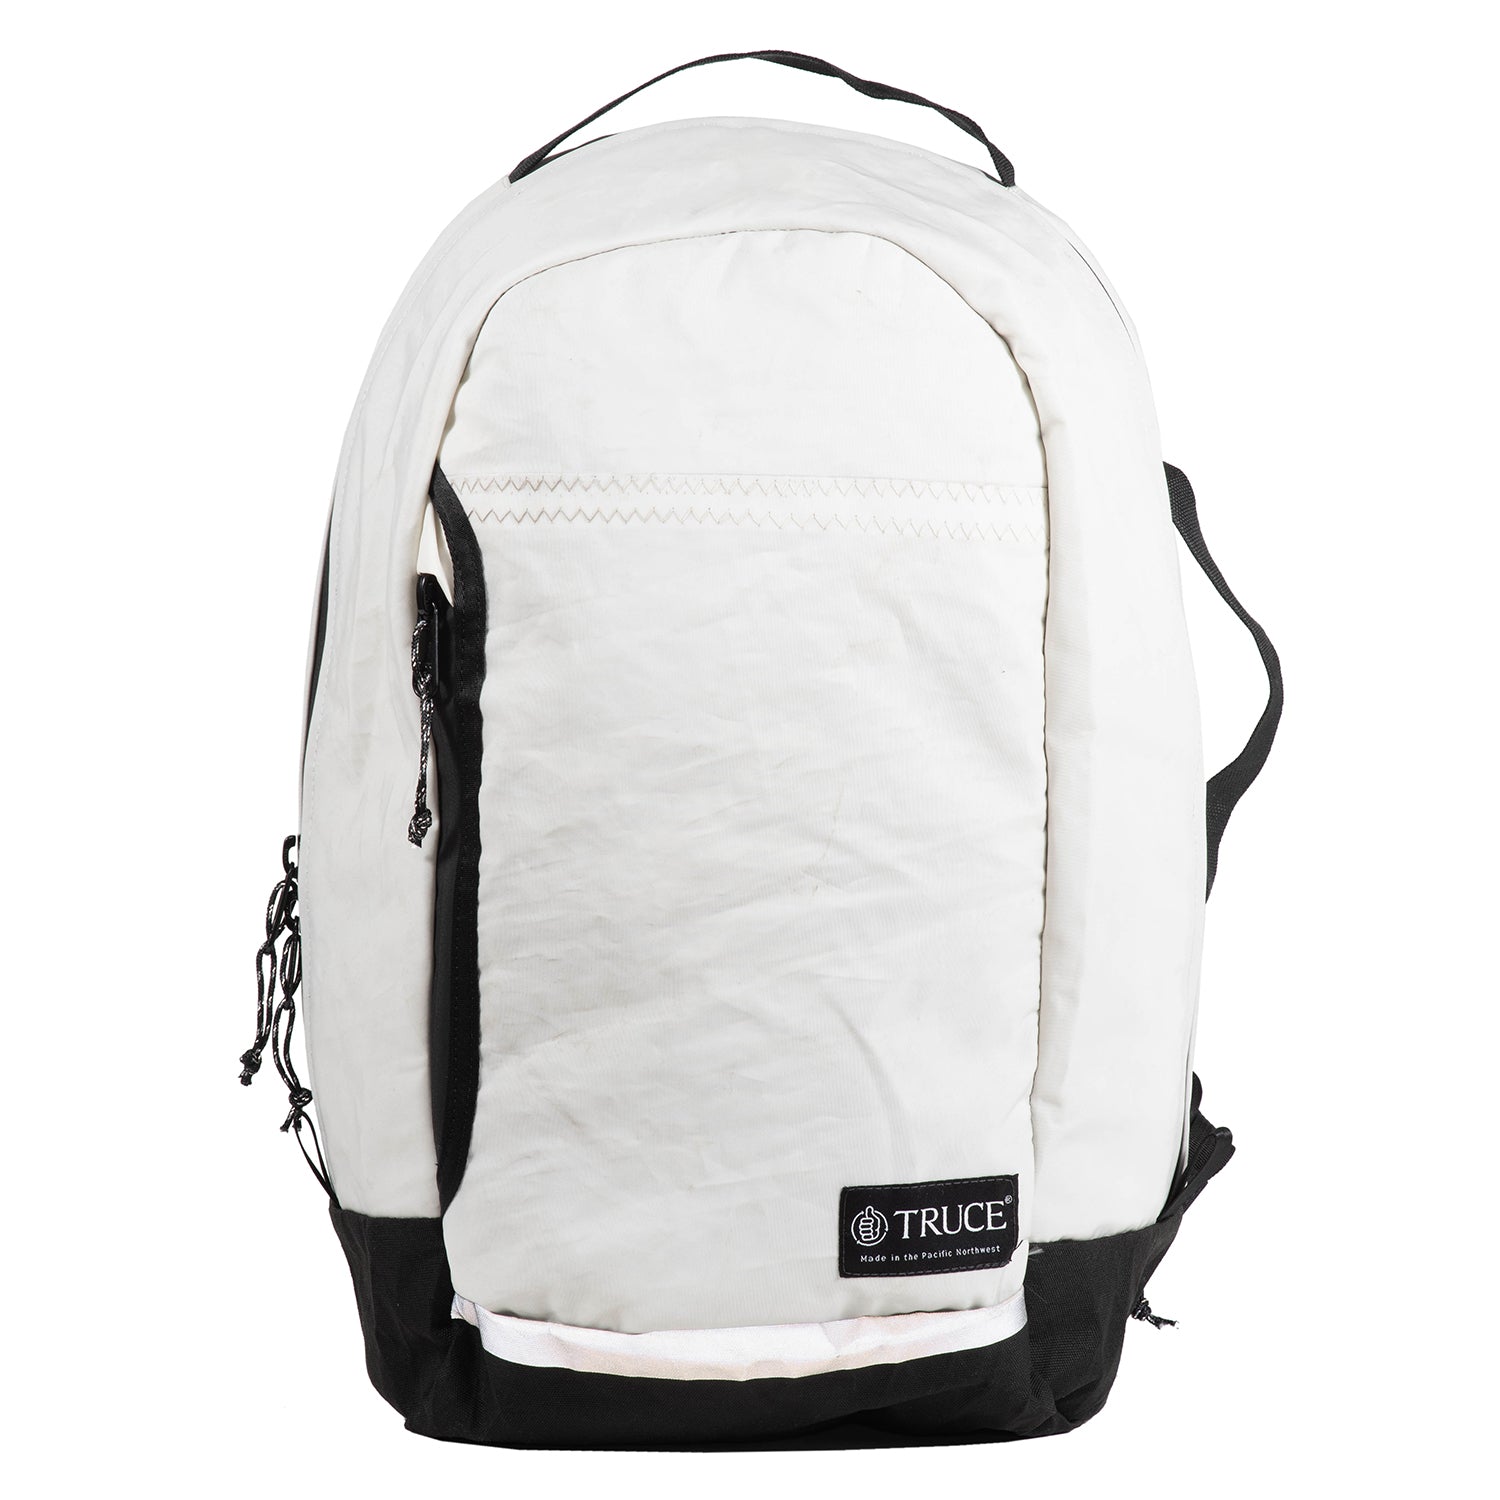 TRUCE DESIGNS New Day Pack